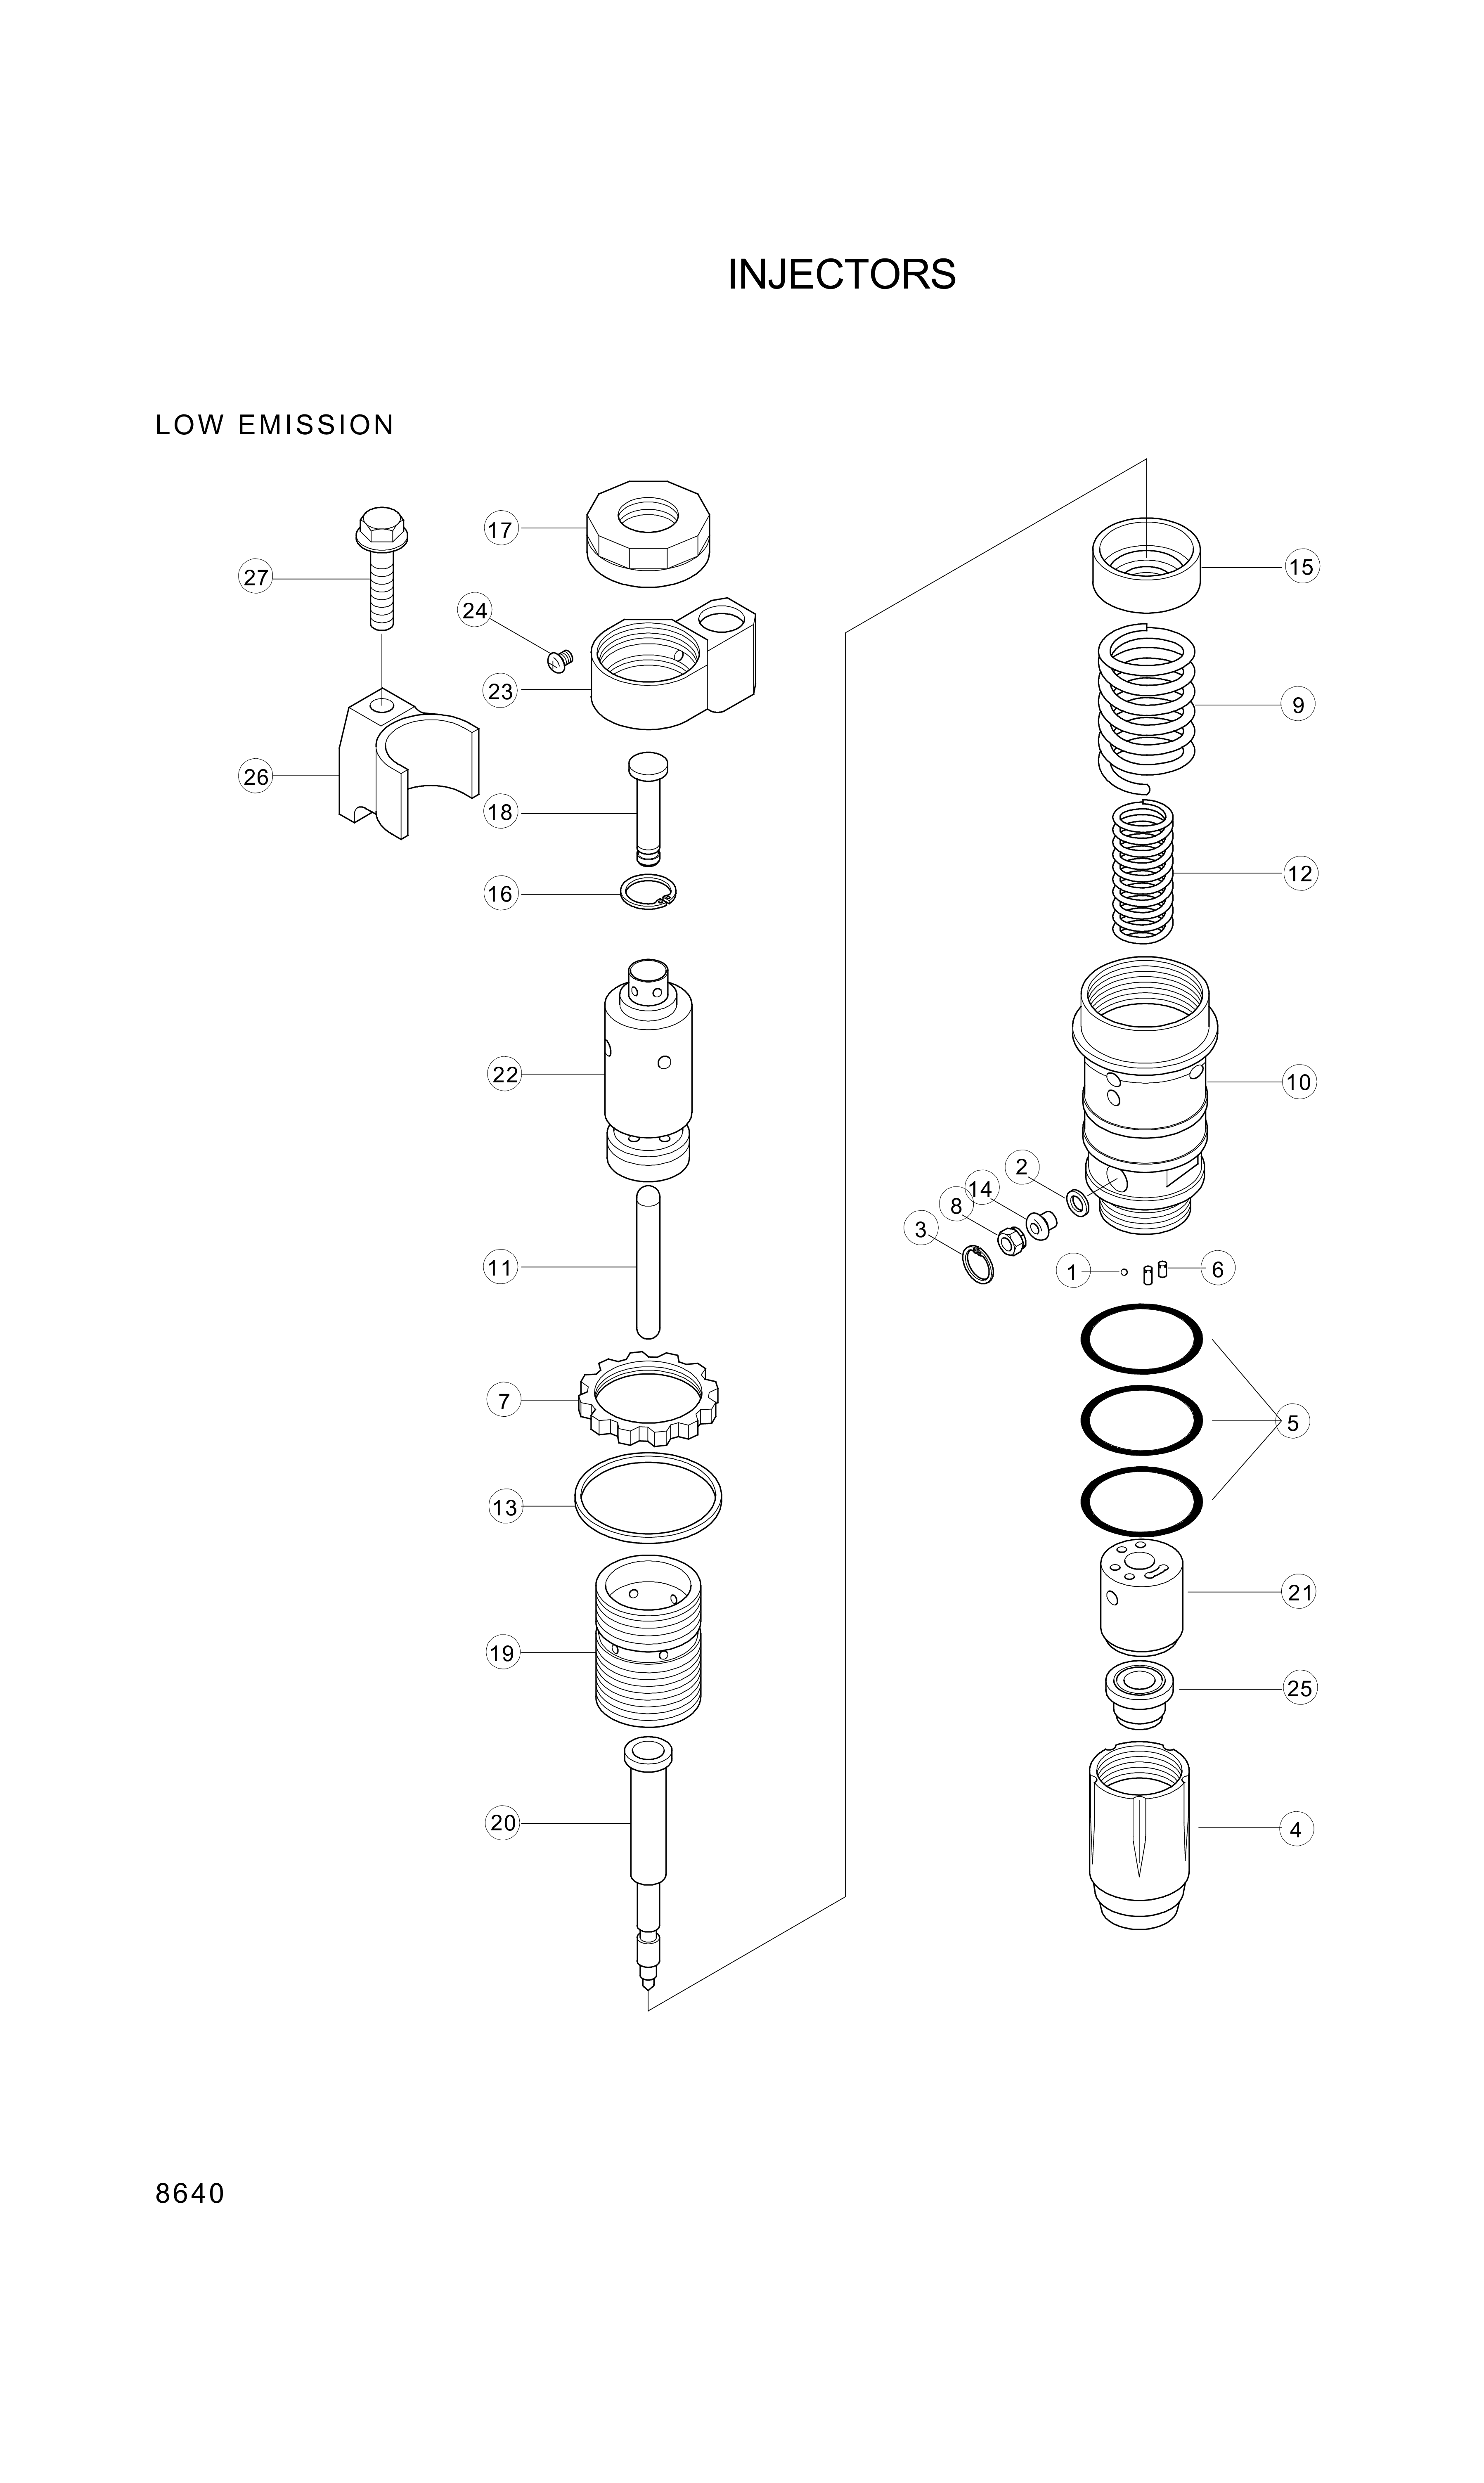 drawing for Hyundai Construction Equipment YUBP-05659 - CUP-INJECTOR (figure 1)